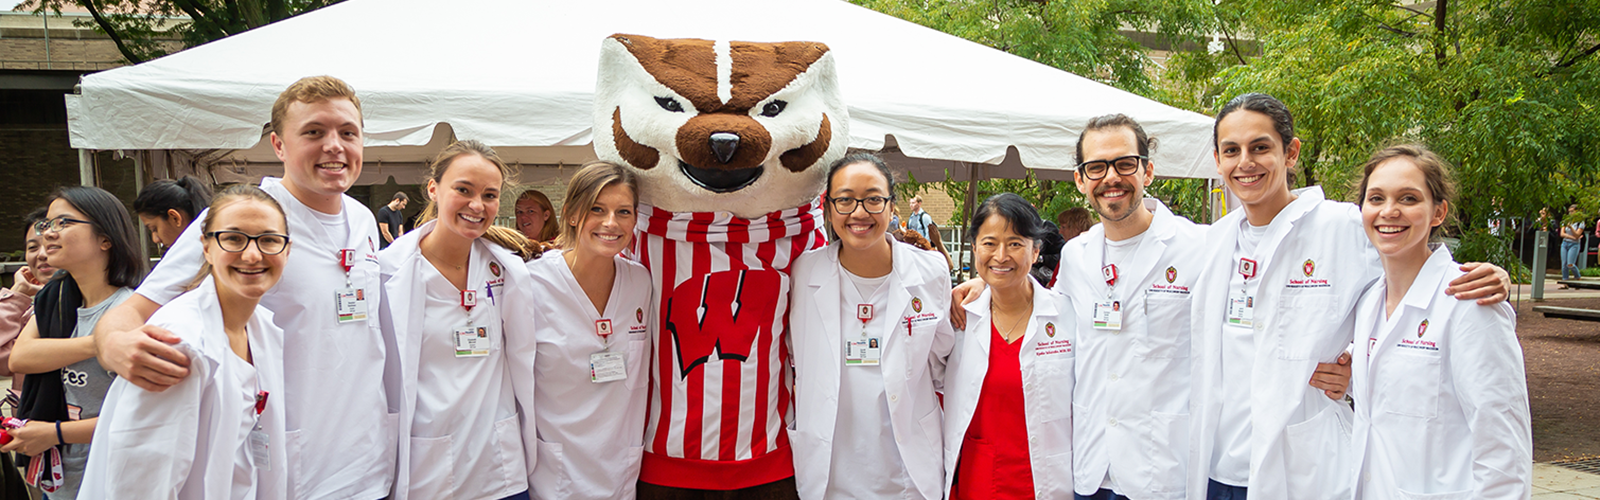 School of Nursing students with Bucky Badger